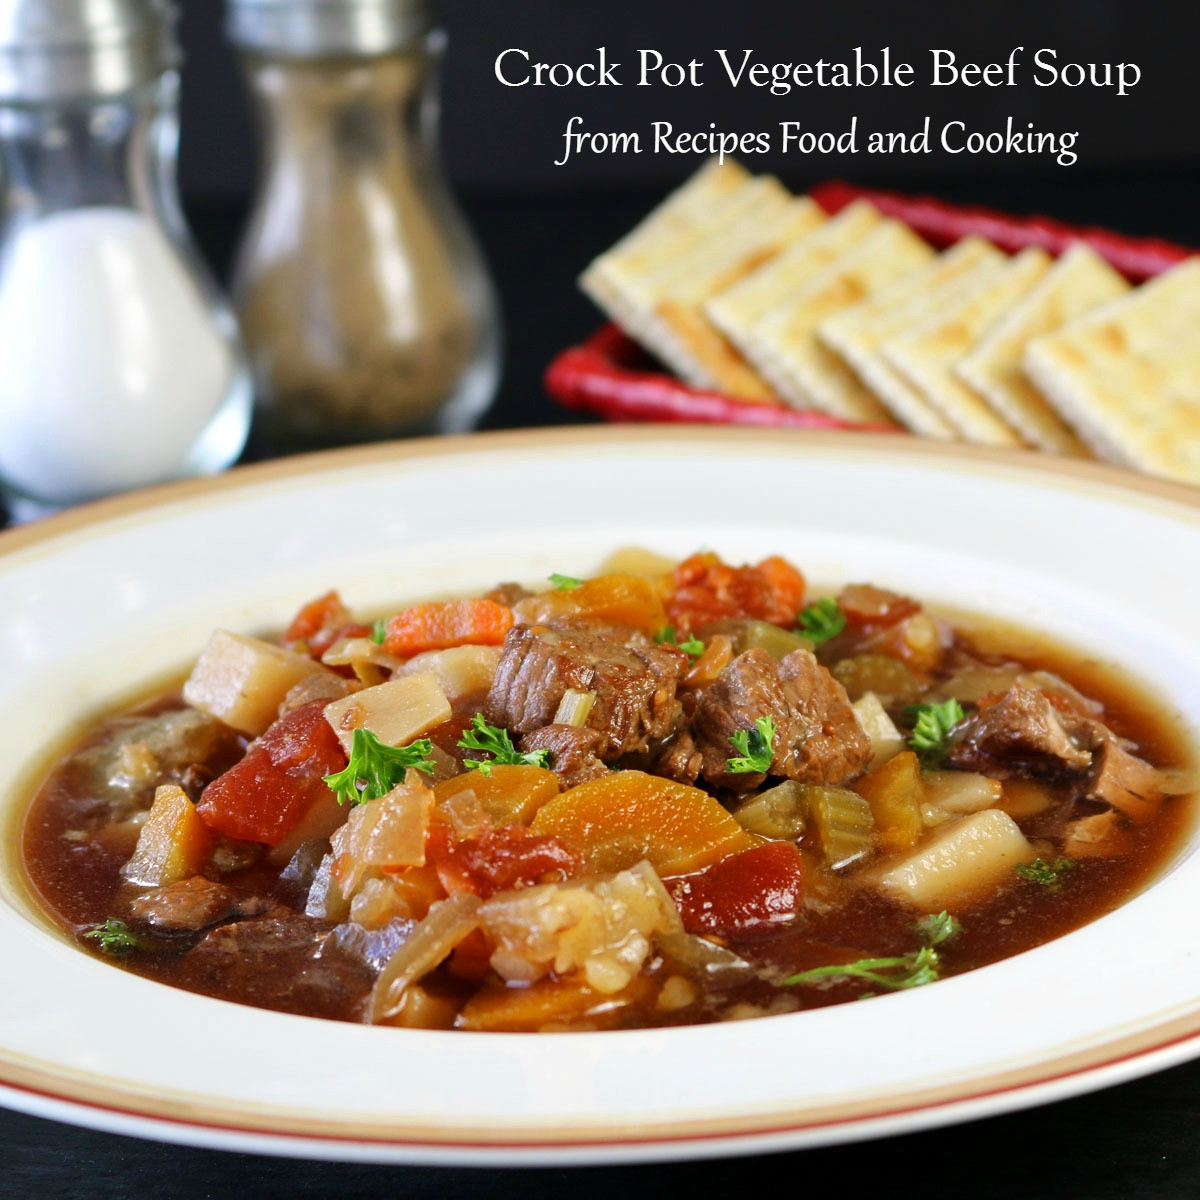 Vegetable Beef Soup Crock Pot
 Crock Pot Ve able Beef Soup Recipes Food and Cooking